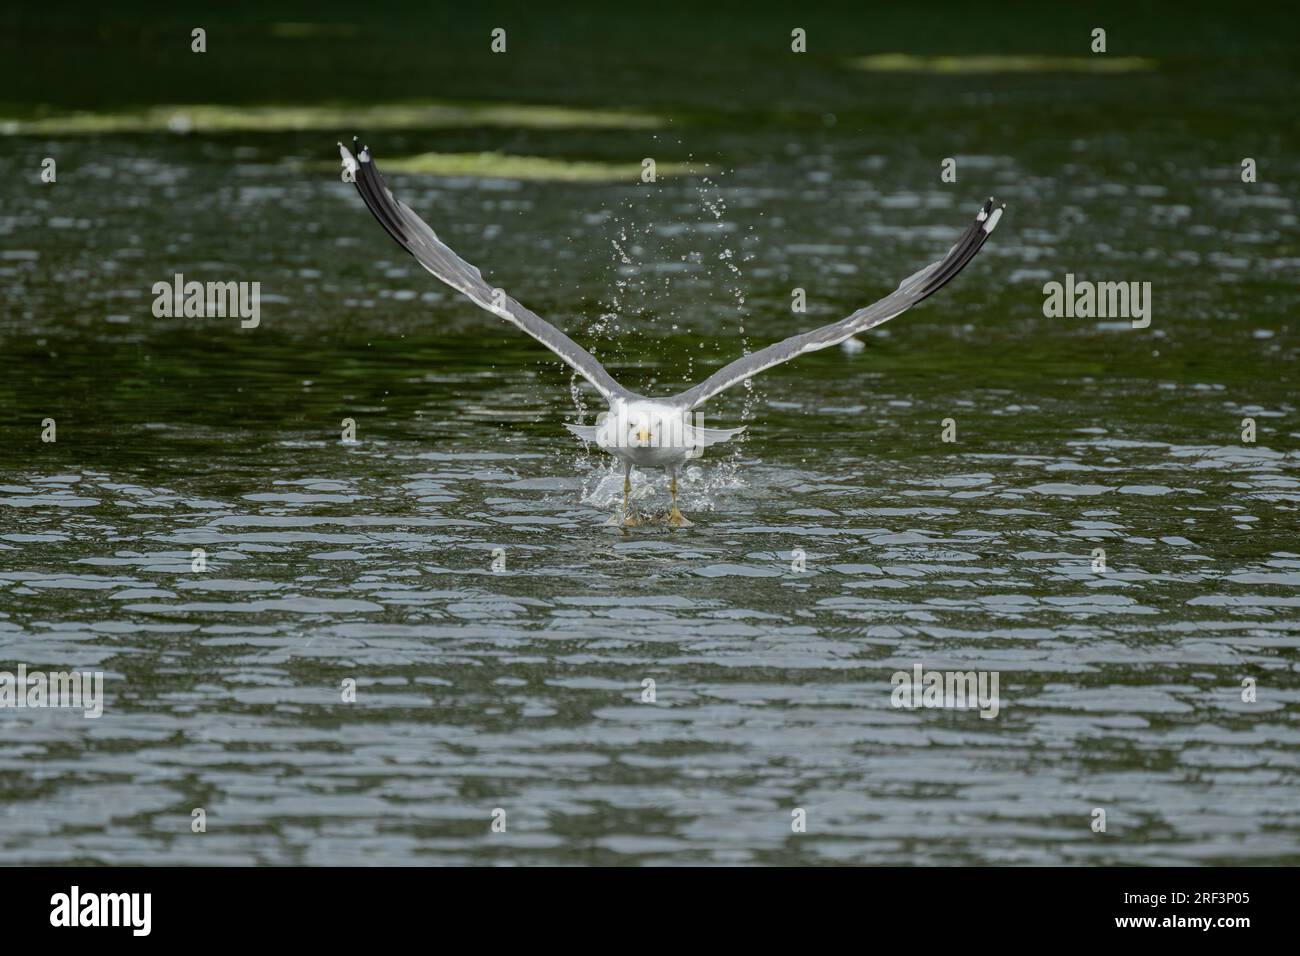 Adult Herring Gull in flight. Adult Herring Gull, Larus argentatus taking off from a lake. Stock Photo